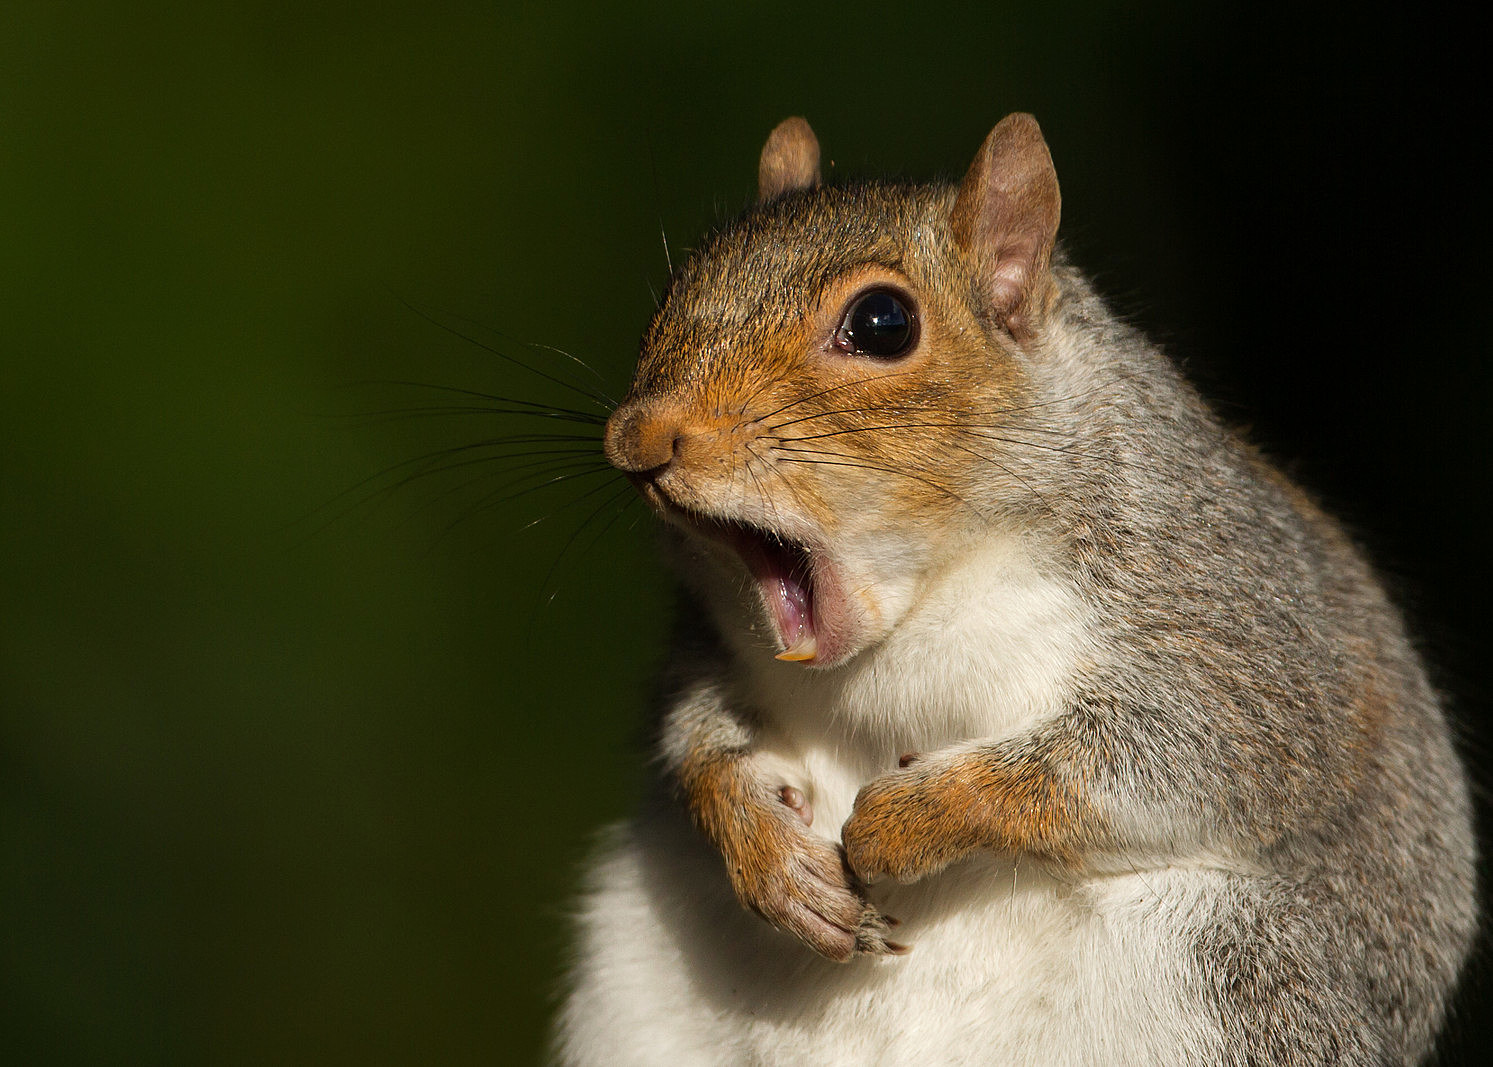 Apropos of nothing, have some pictures of squirrels posing like superheroes  - The Verge